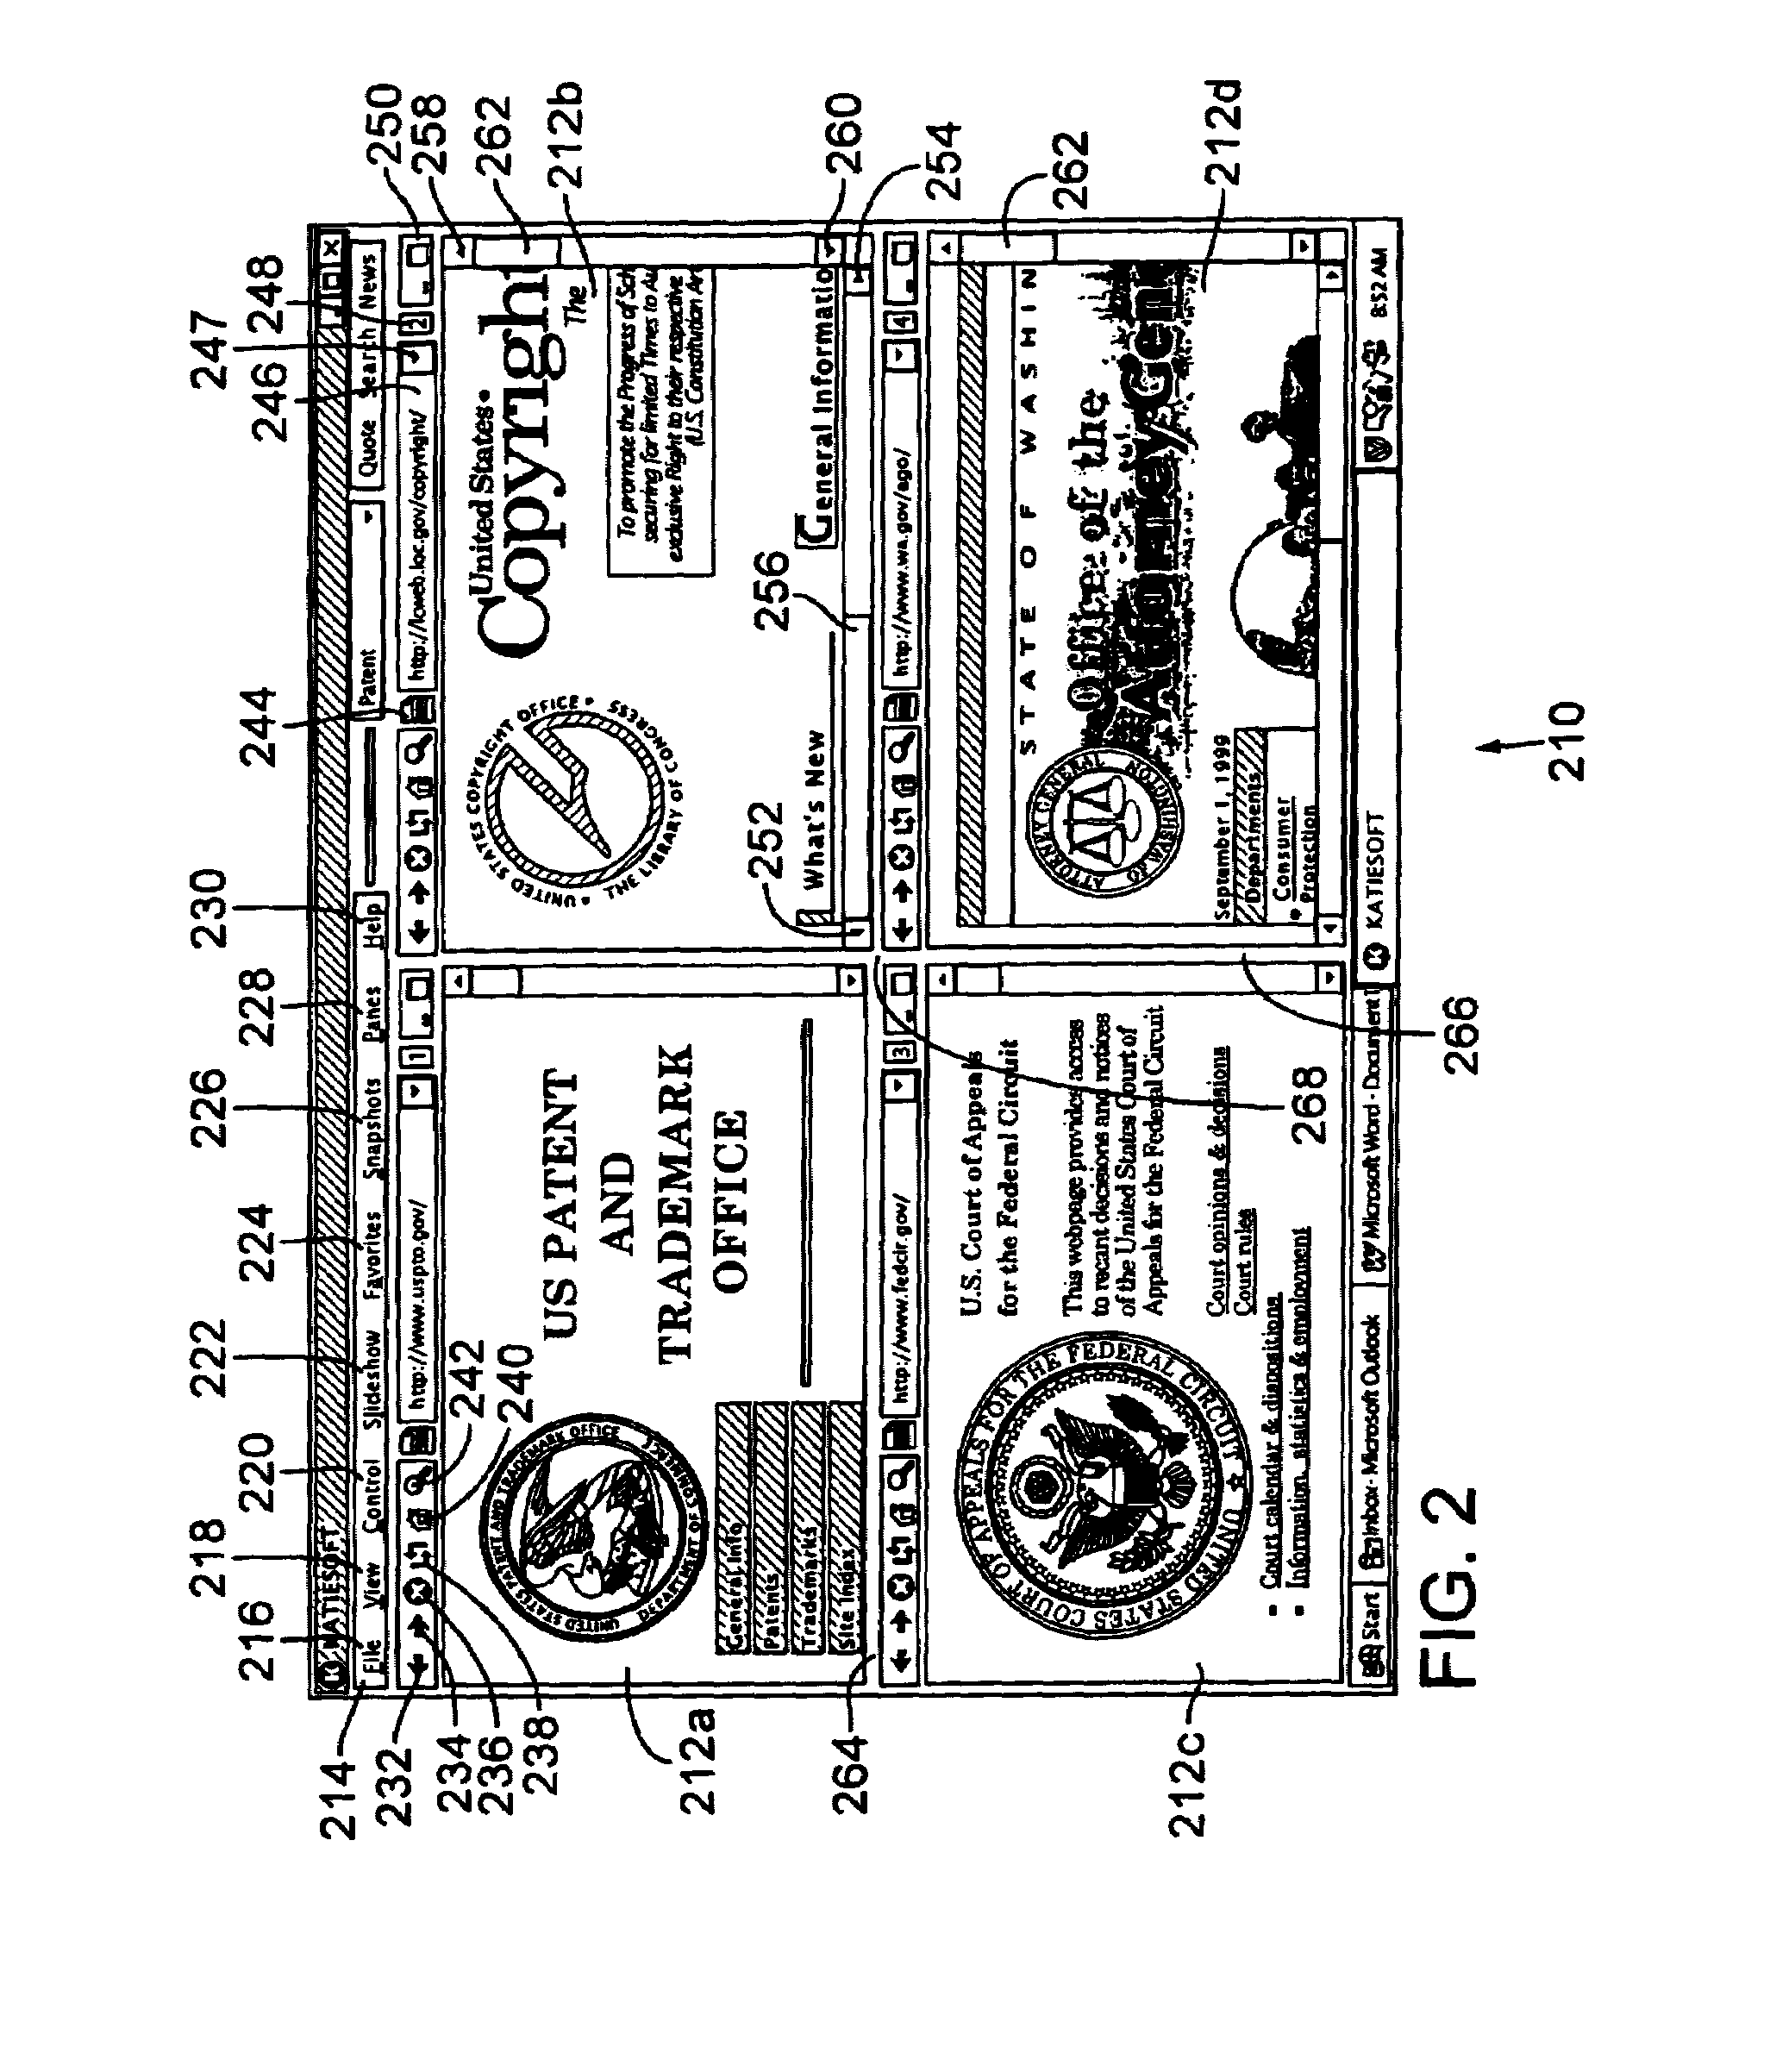 System and method for saving user-specified views of internet web page displays